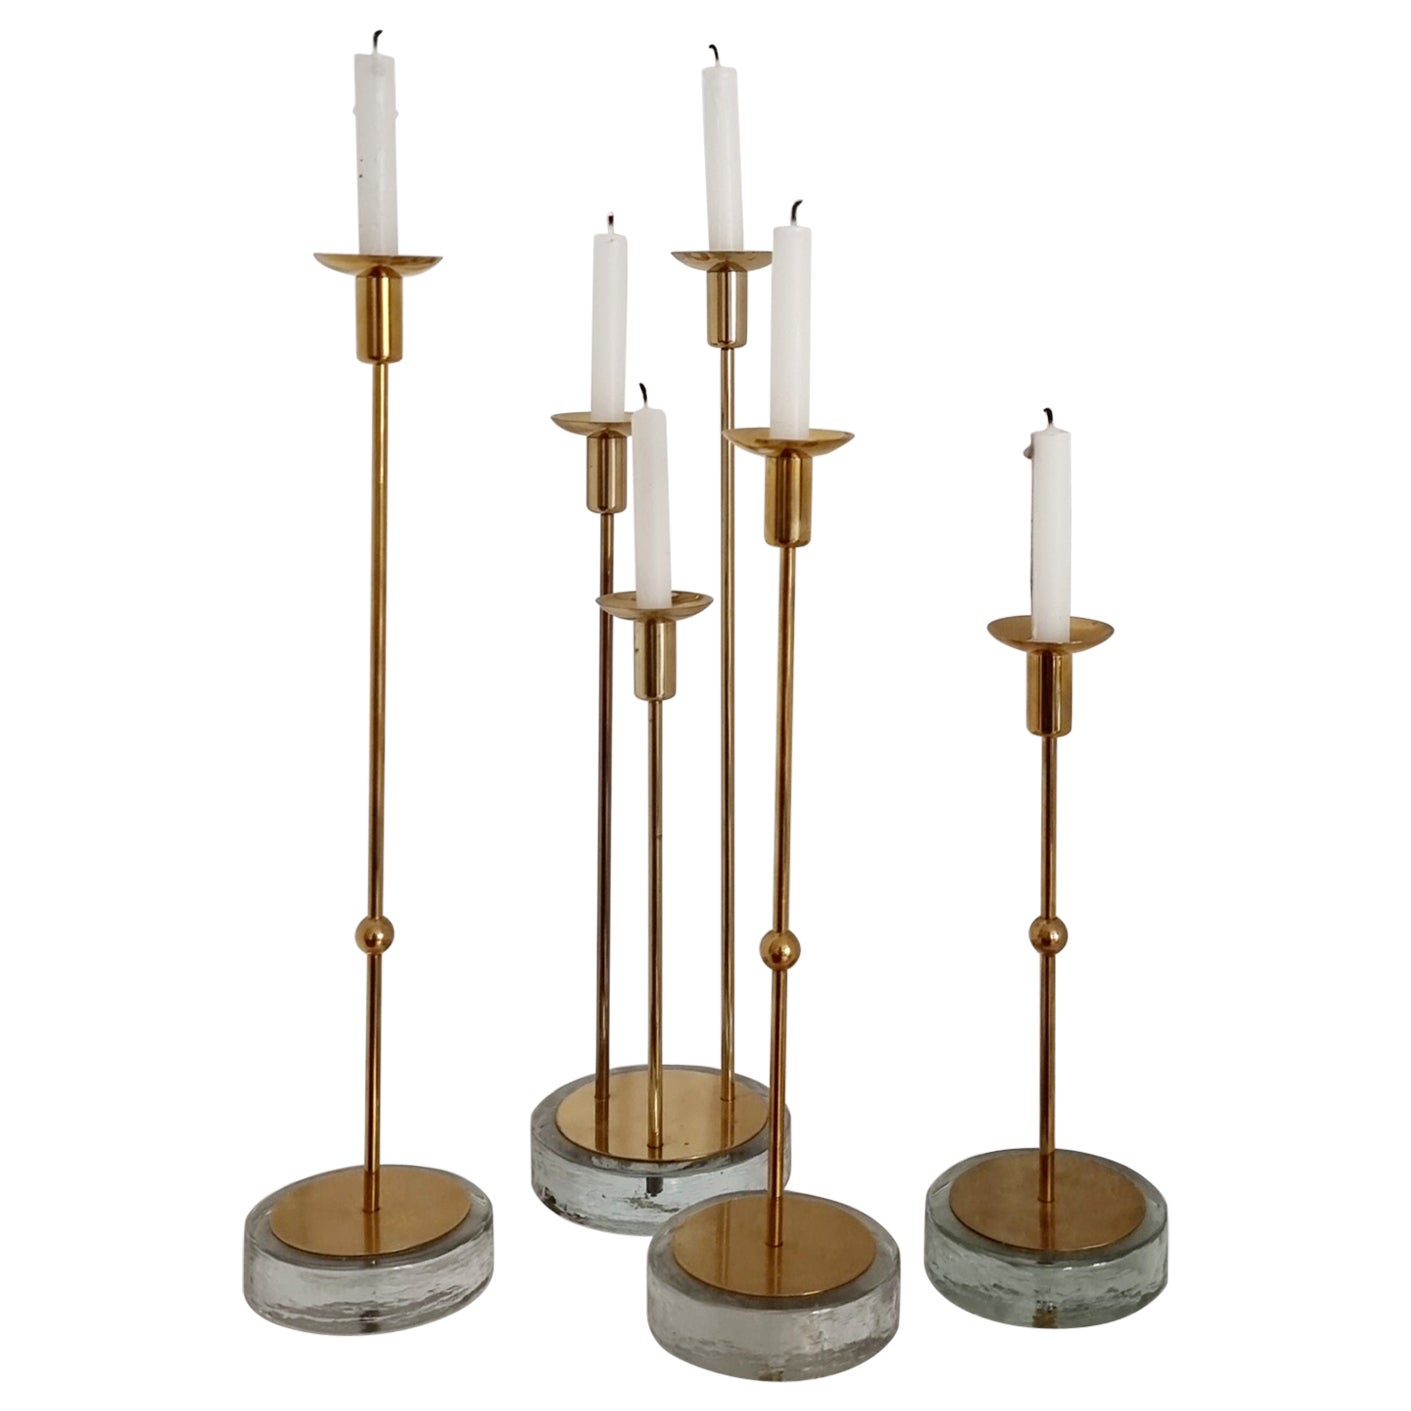 Gunnar Ander, Four Candle Holders, Brass & Glass, Ystad Metall, Swedish Modern For Sale